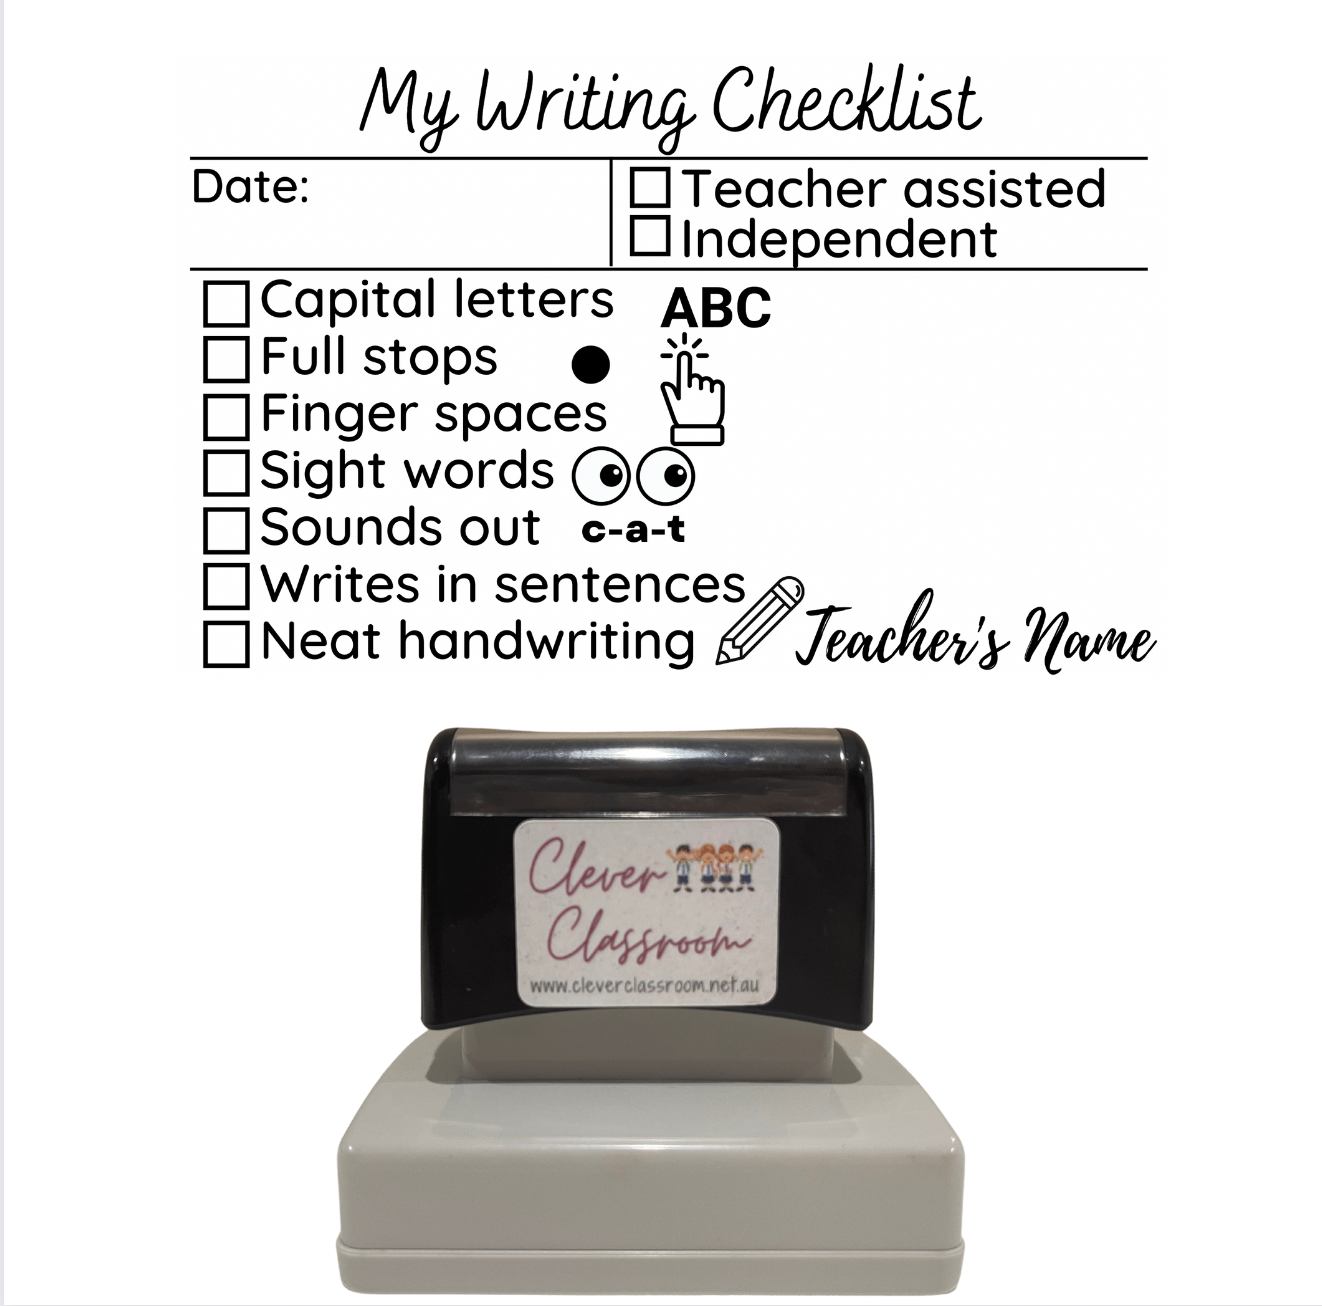 Seven Steps 2 Writing Checklist Stamp - 43 x 67mm Rectangle